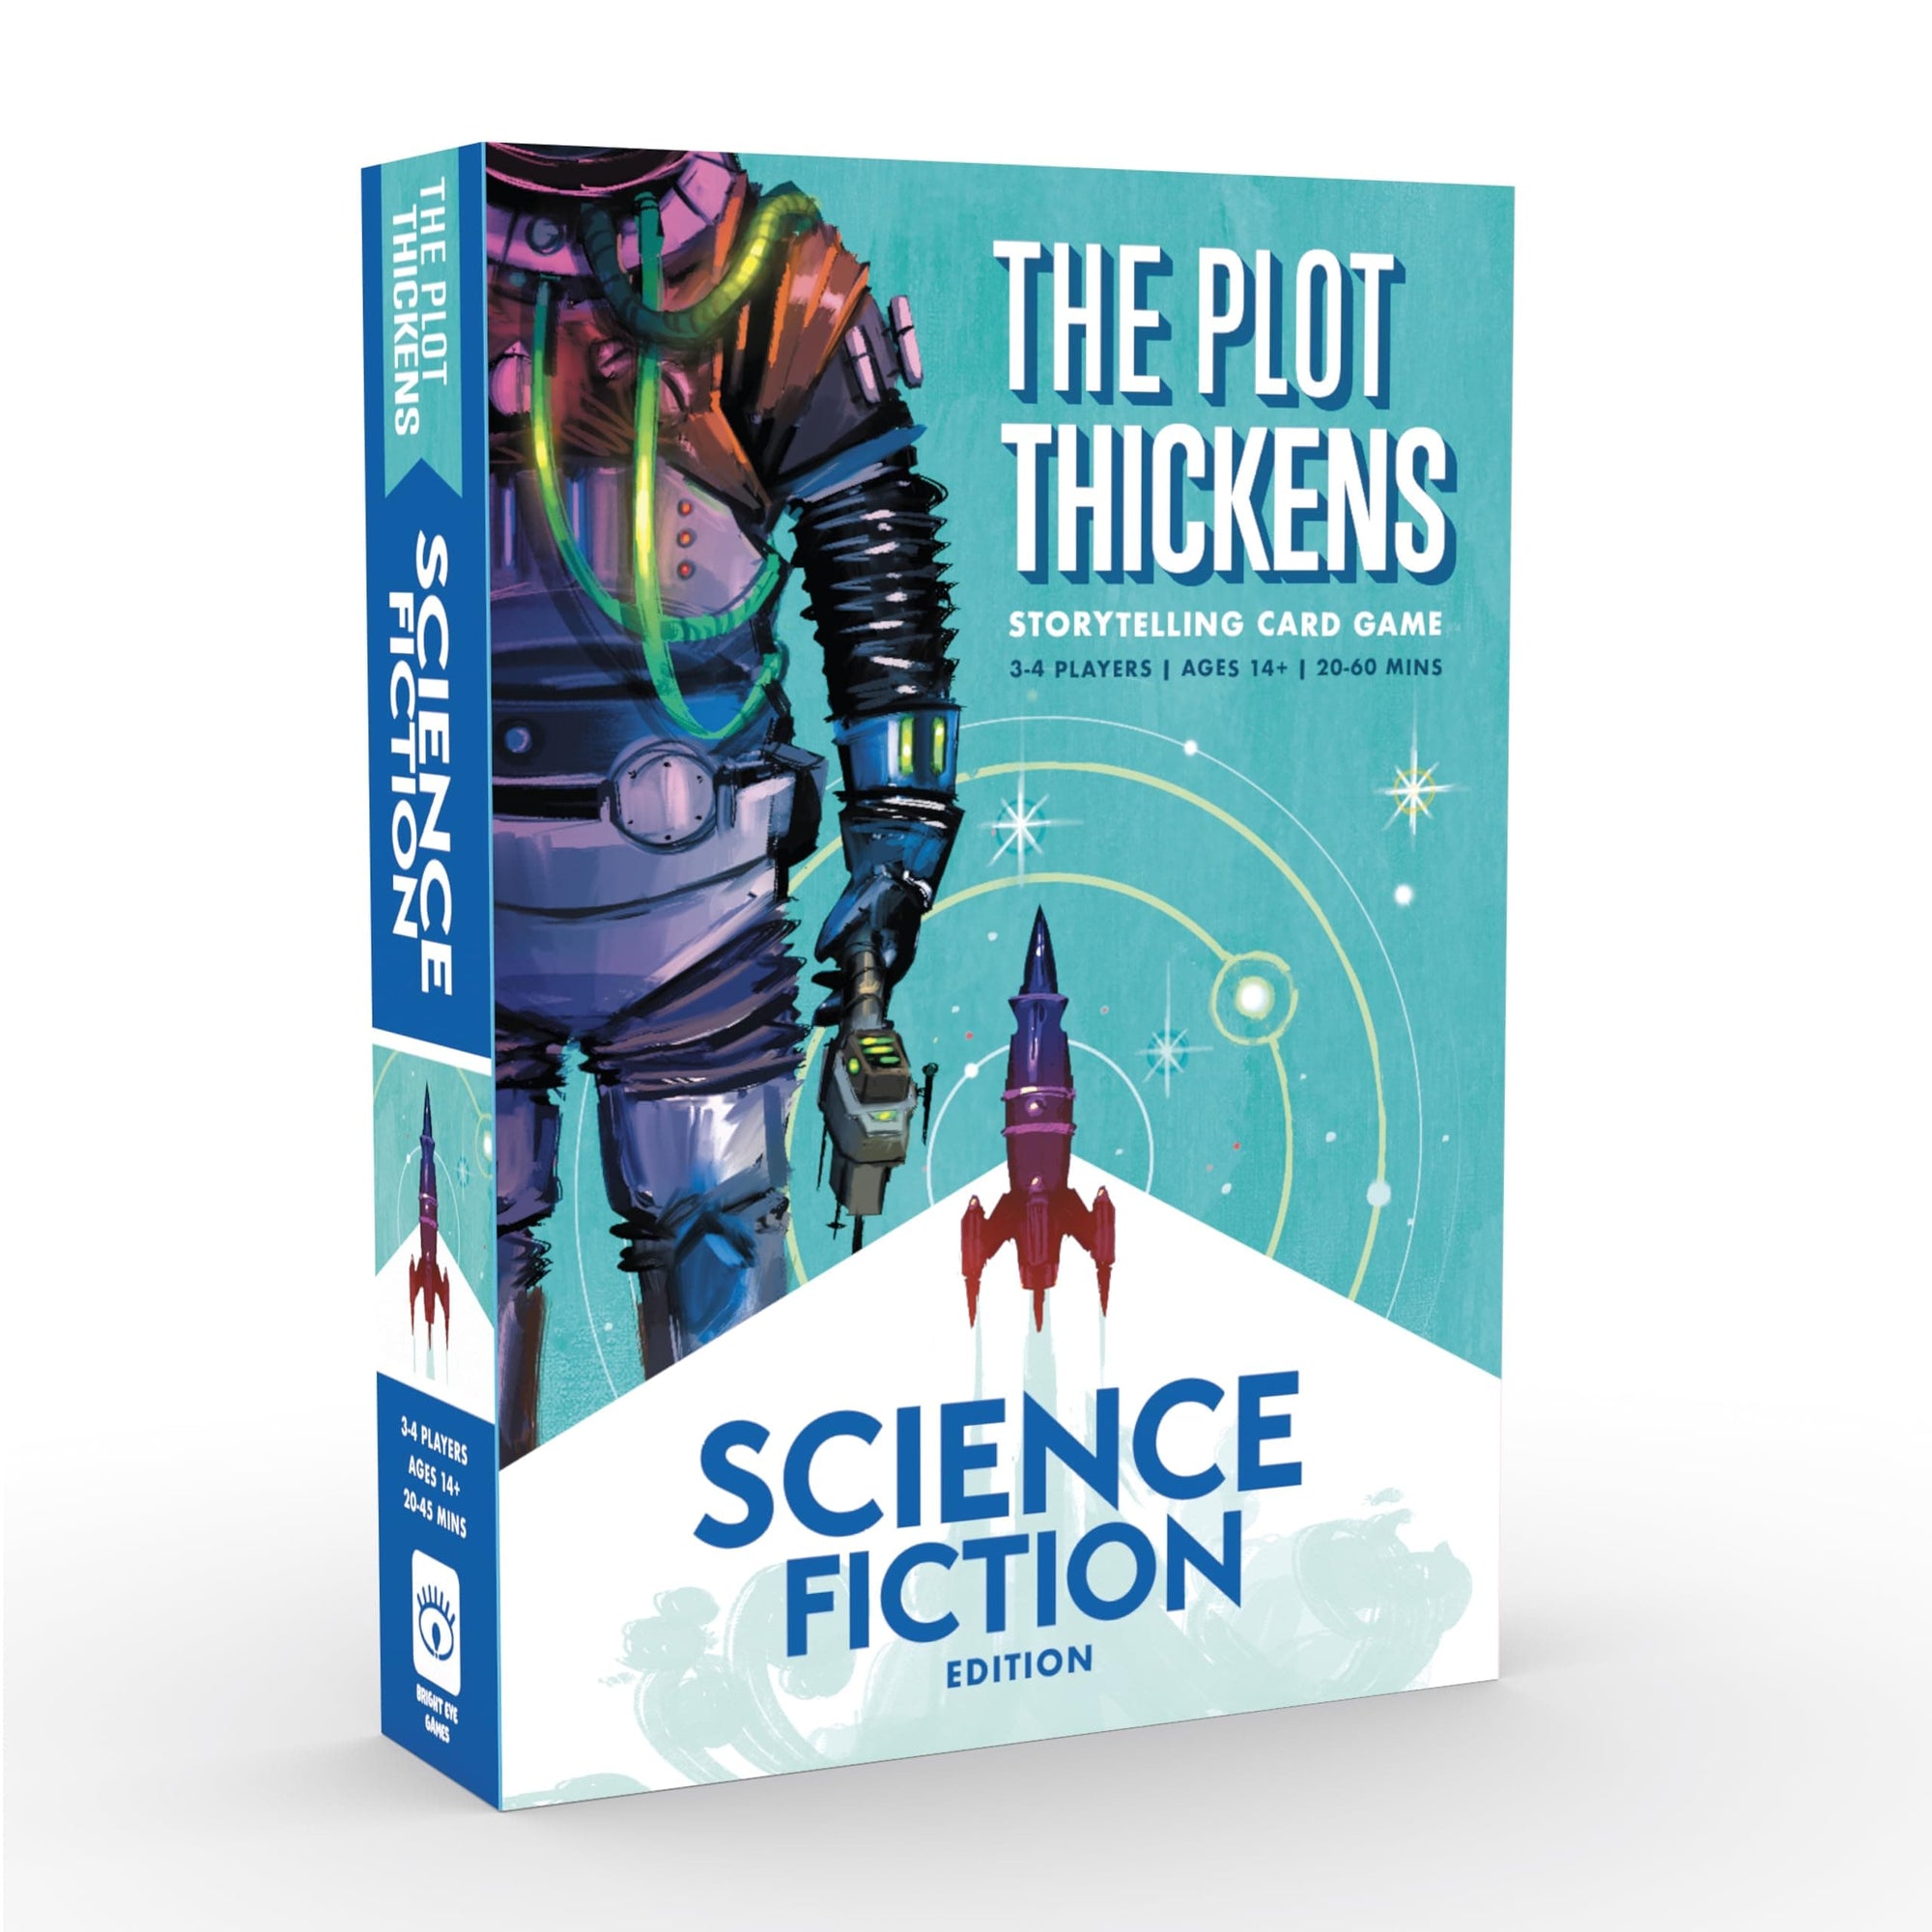 Bright Eye Games Board Games Bright Eye Games The Plot Thickens: Science Fiction Edition